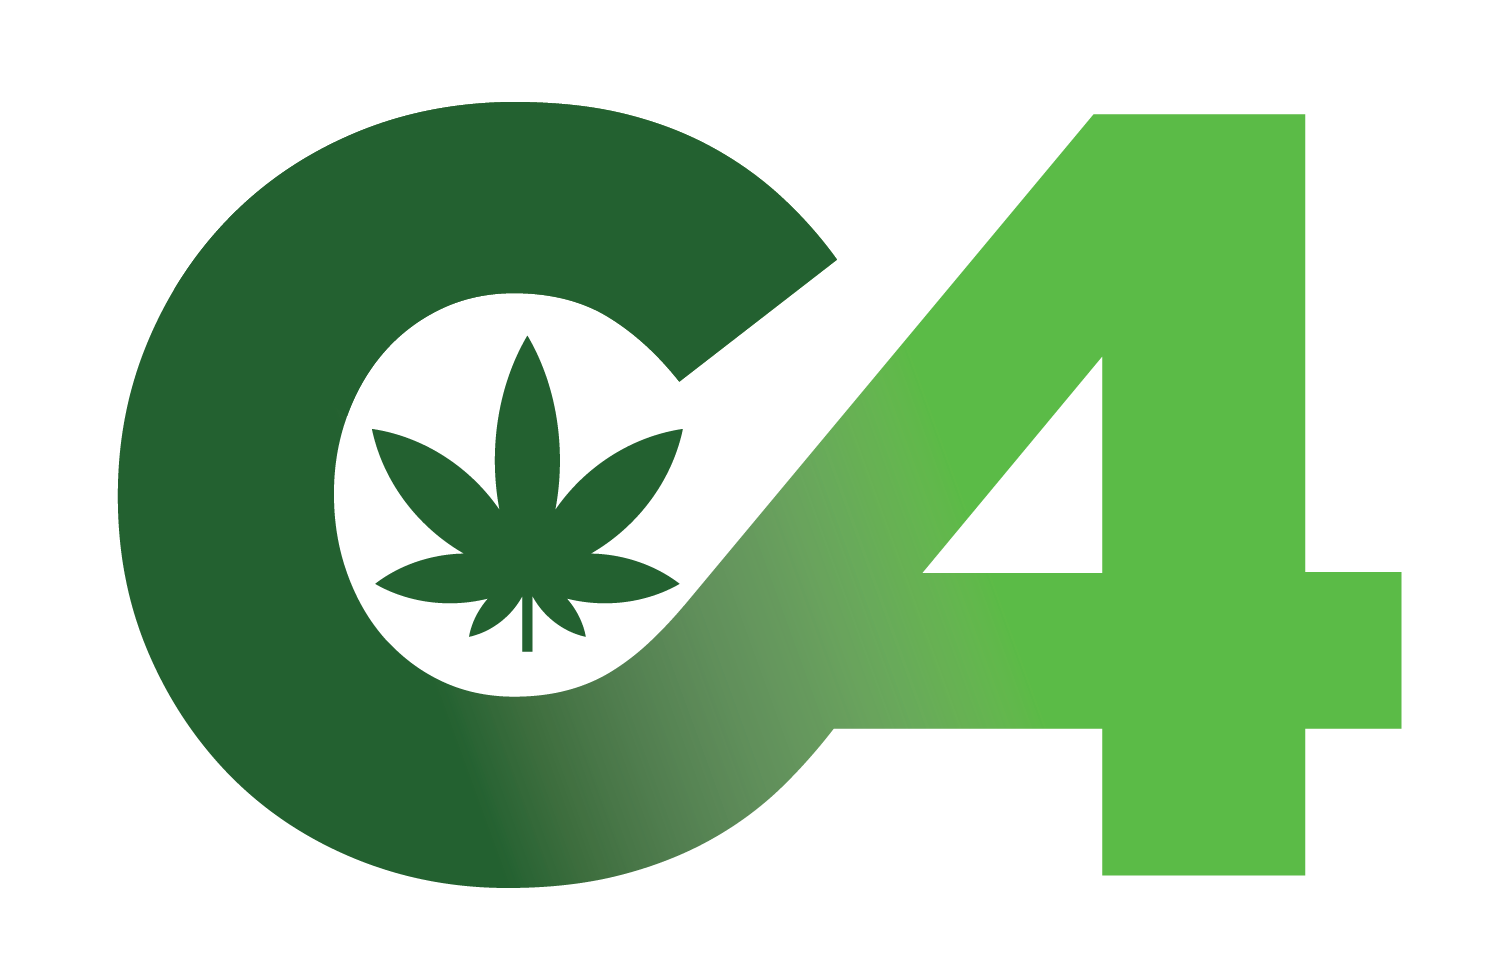 Chico California Cannabis Company - Wholesale production and distributor of medical-grade cannabis products.